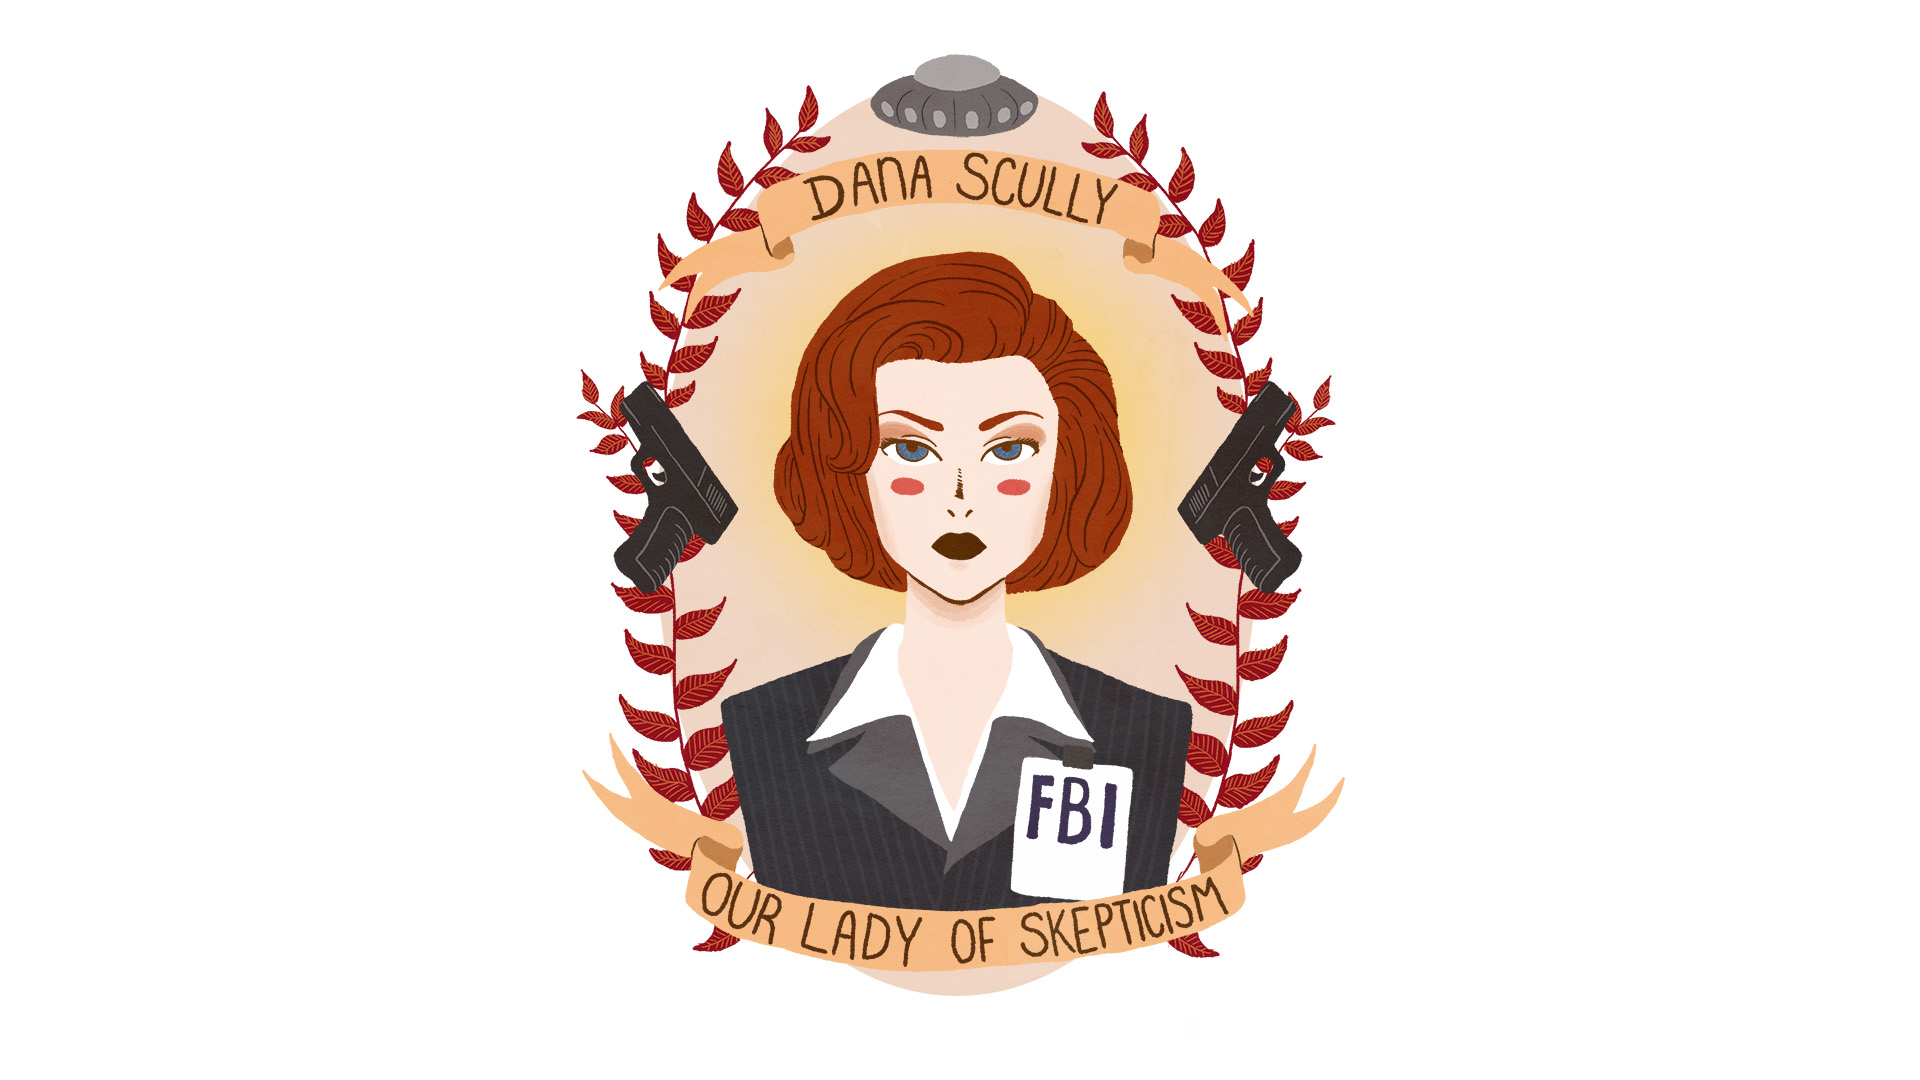 Dana Scully – our lady of skepticism